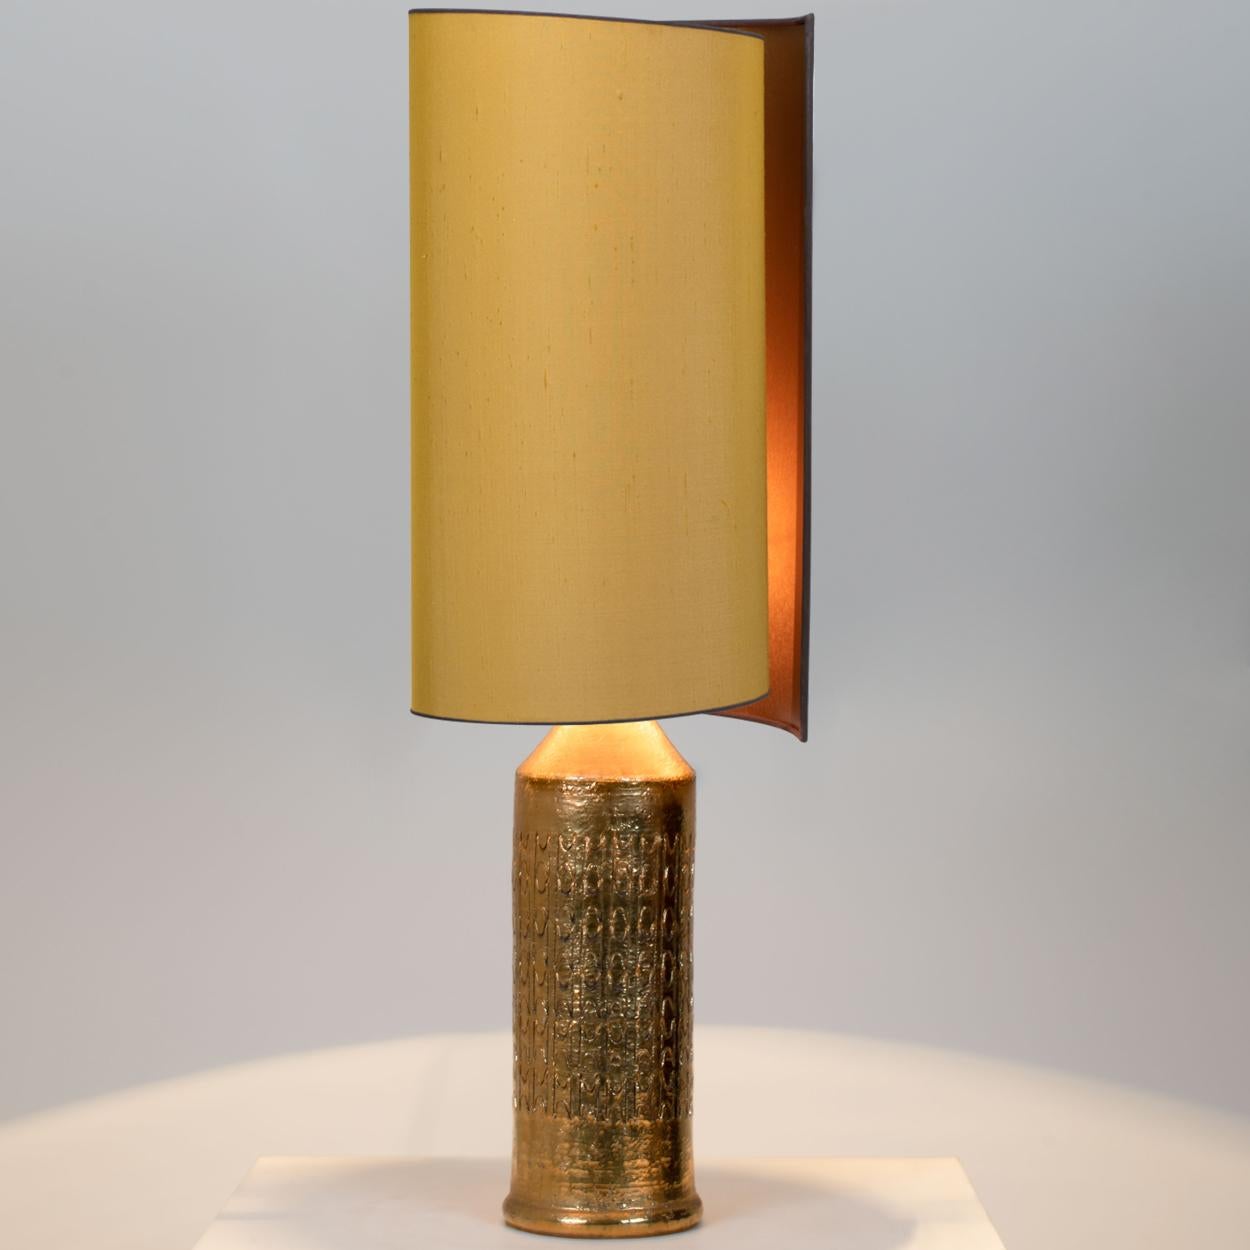 1 of the 2 elegant table lamps. Each lamp features a ceramic base with a rough surface in an off-white glaze with shiny metallic gold glazed patterns, Bitossi, Italy, circa 1960s. With exceptional new custom made silk shades by René Houben. With